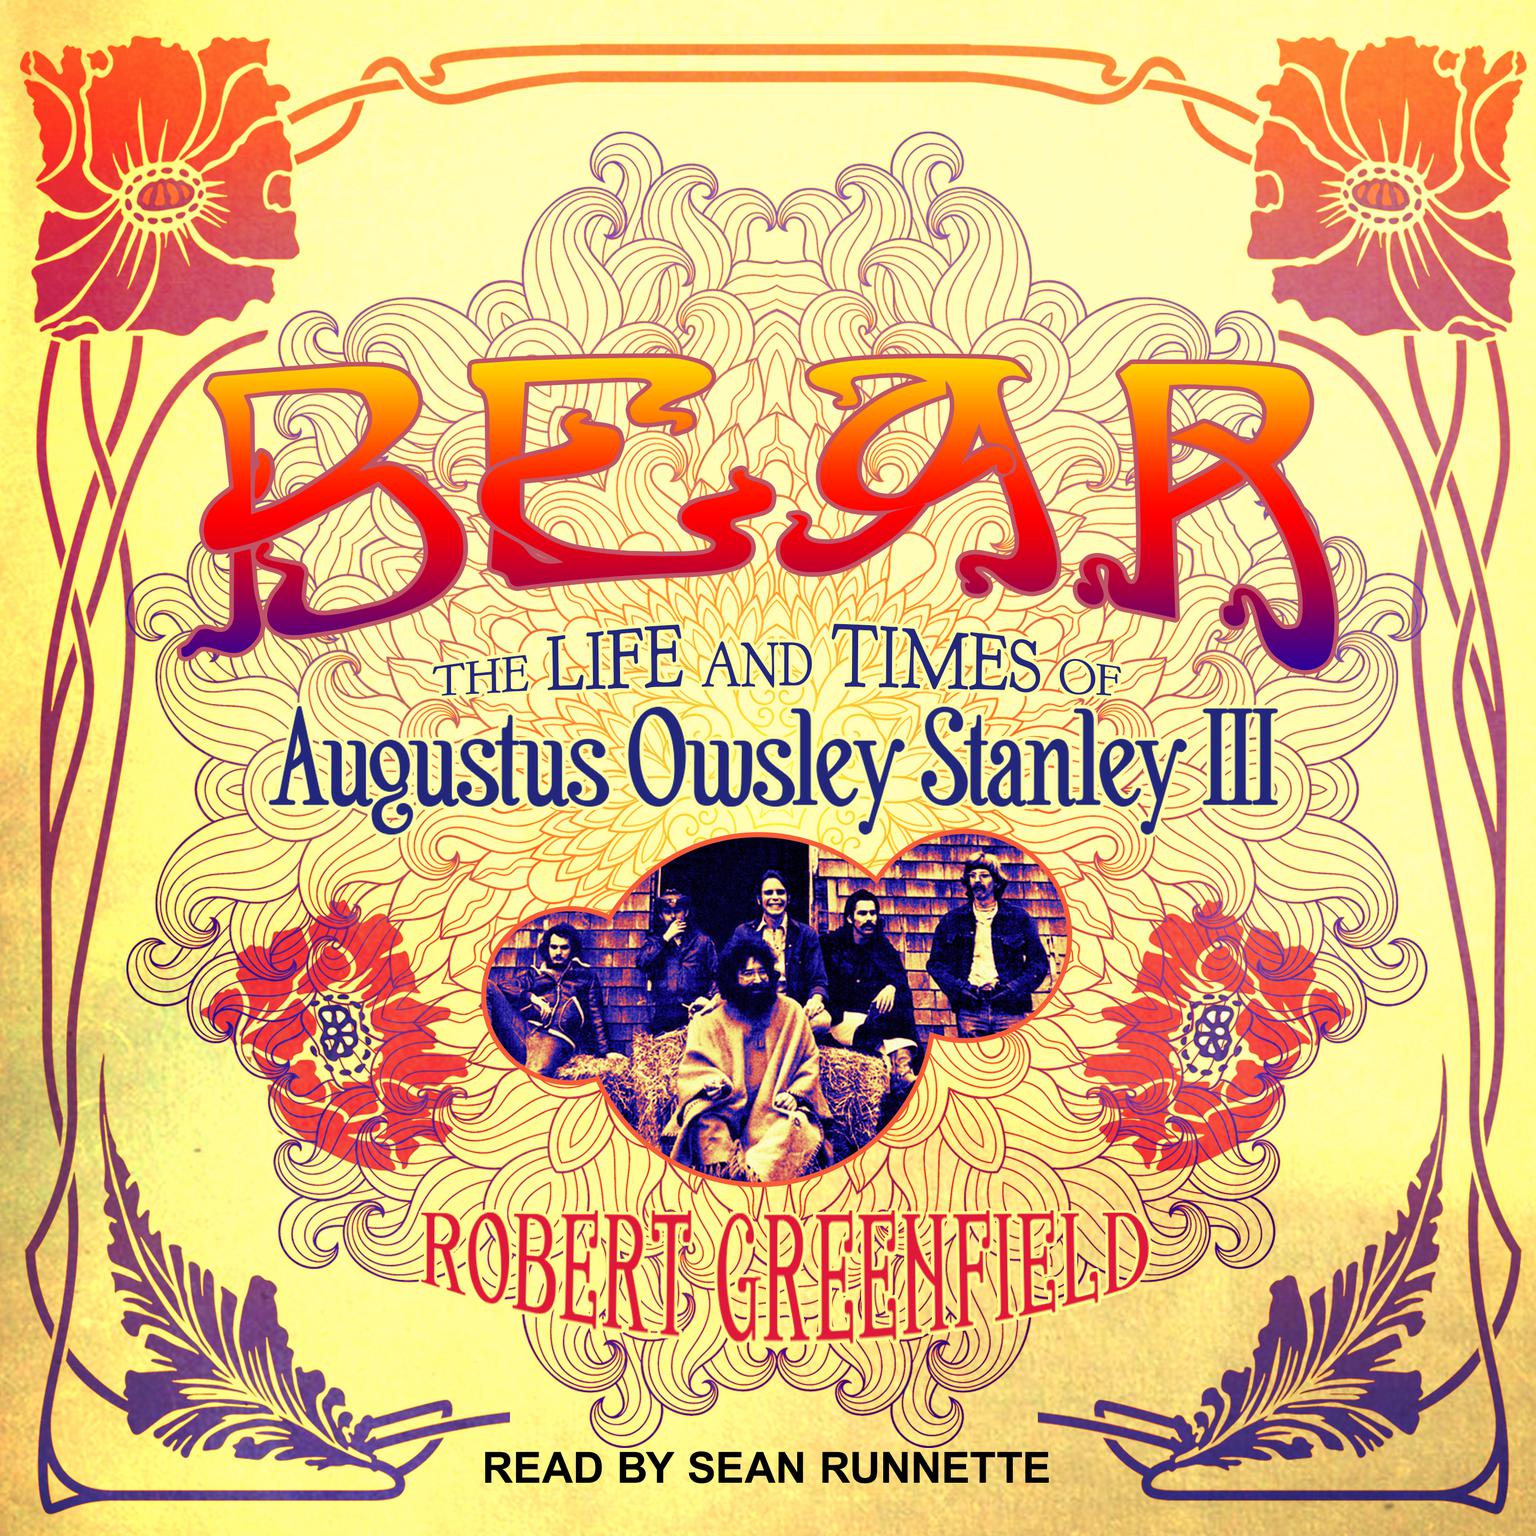 Bear: The Life and Times of Augustus Owsley Stanley III Audiobook, by Robert Greenfield